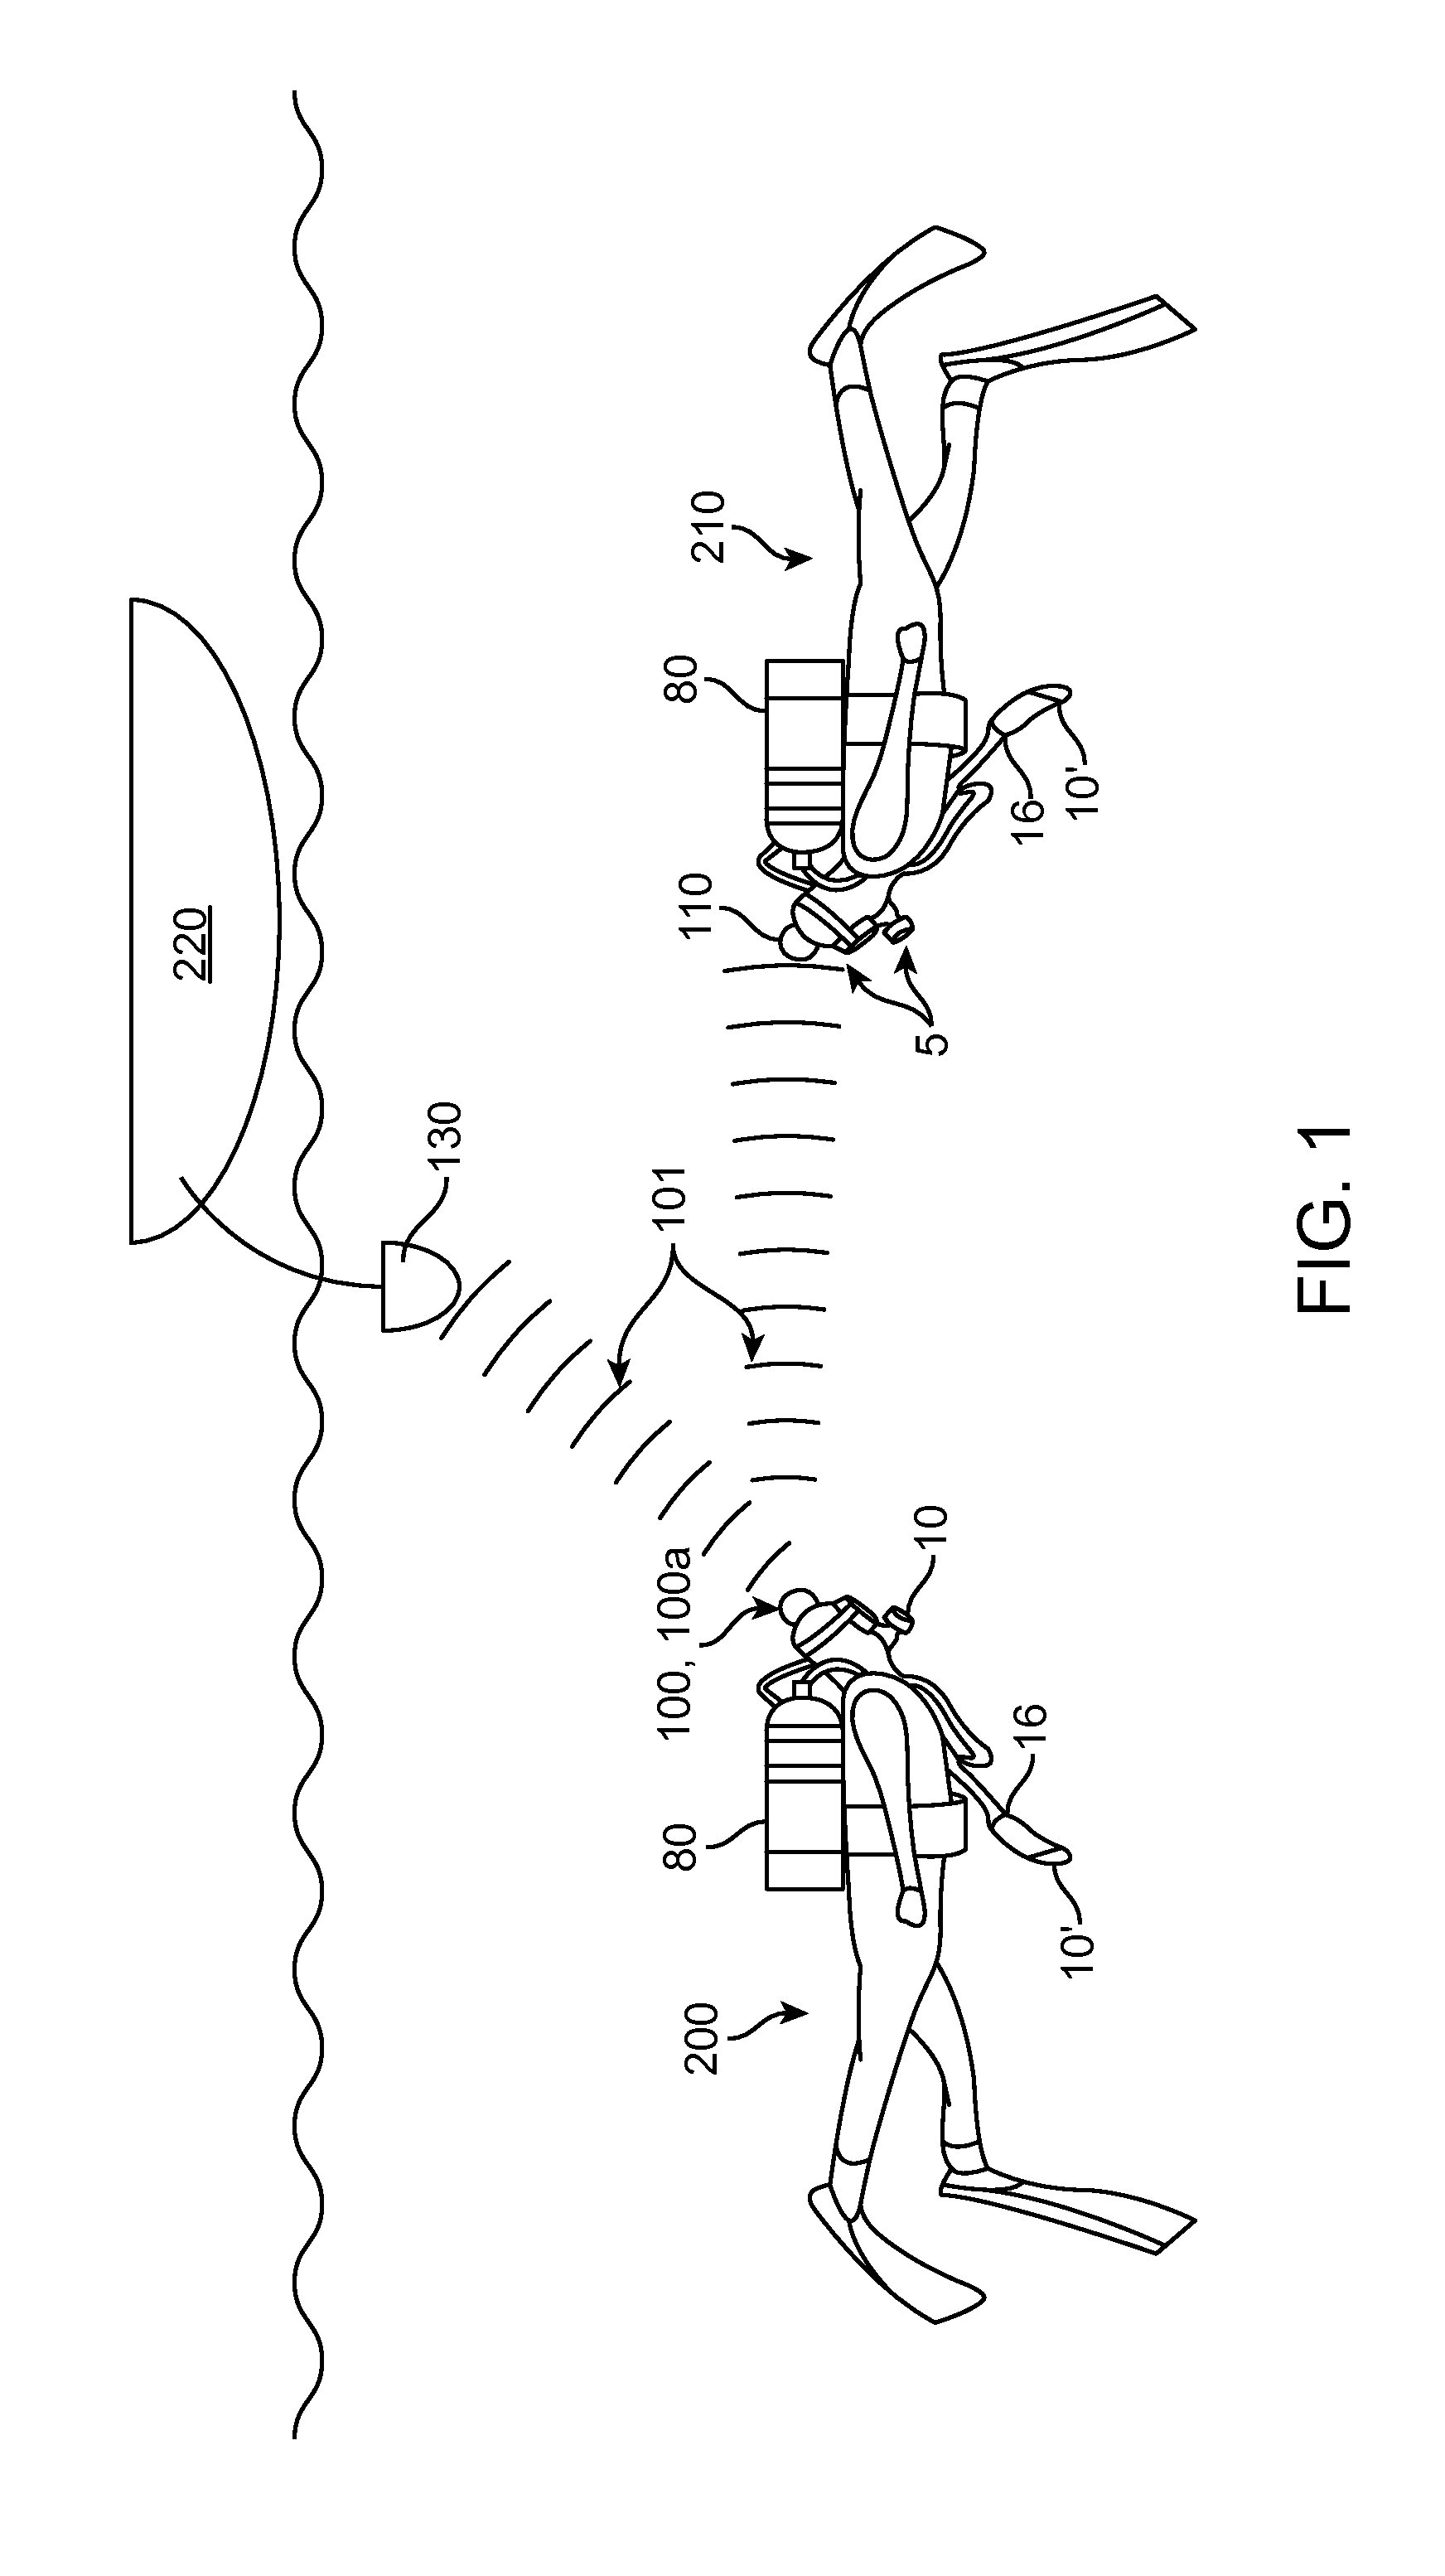 Apparatus, system and method for underwater voice communication by a diver